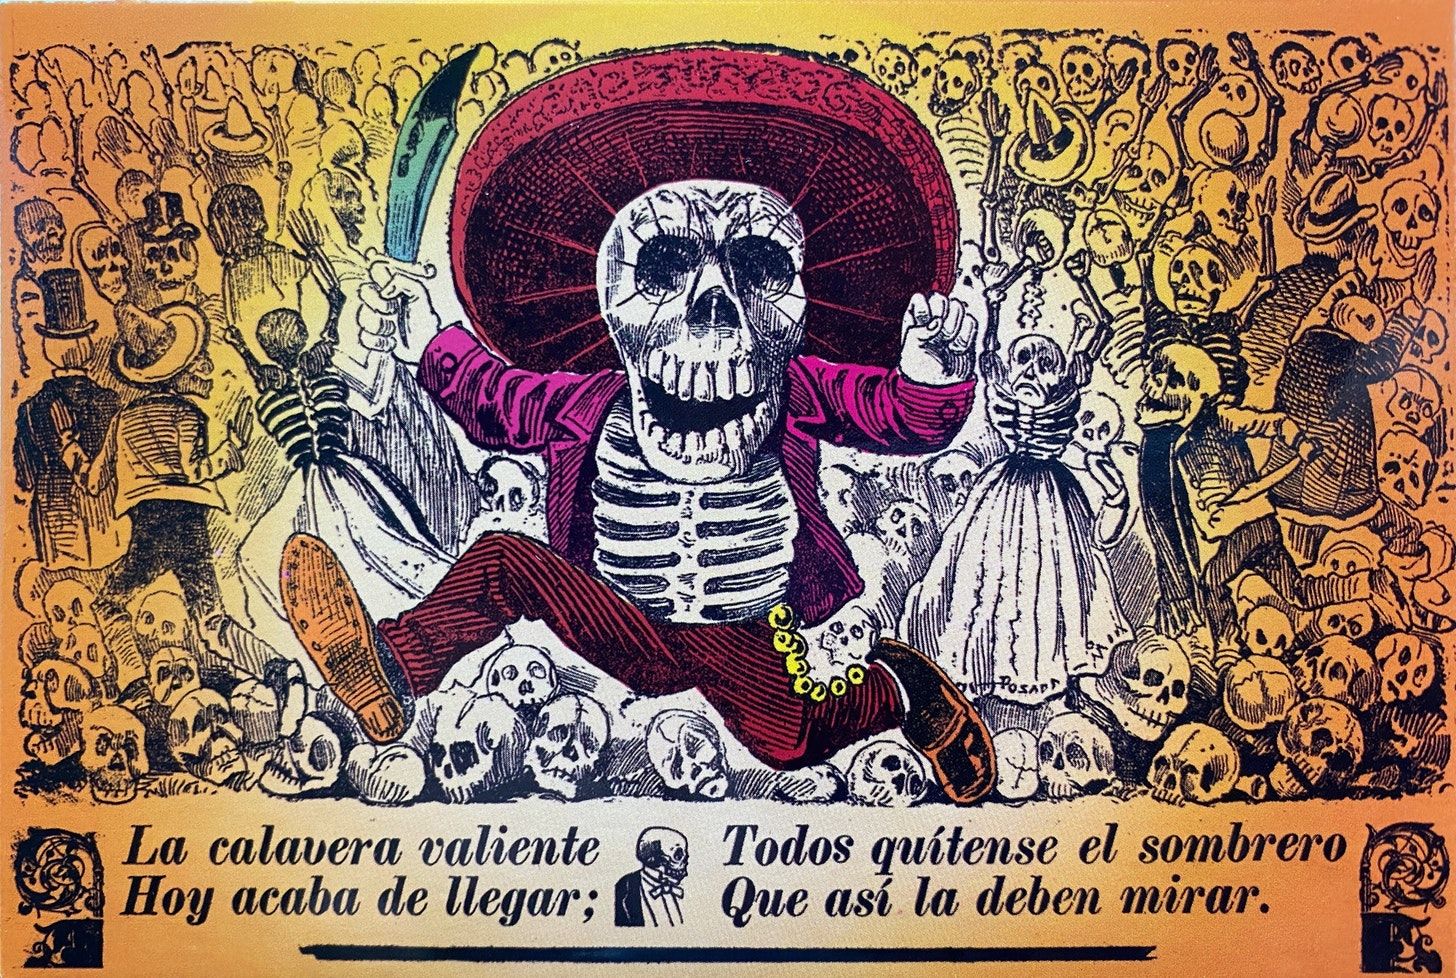 A skeleton wearing a big sombrero, a jacket, charro pants and boots, running towards the viewer with a knife in their right hand. In the background, a crowd of skeletons, either running away or looking at the armed skeleton, with their arms raised.